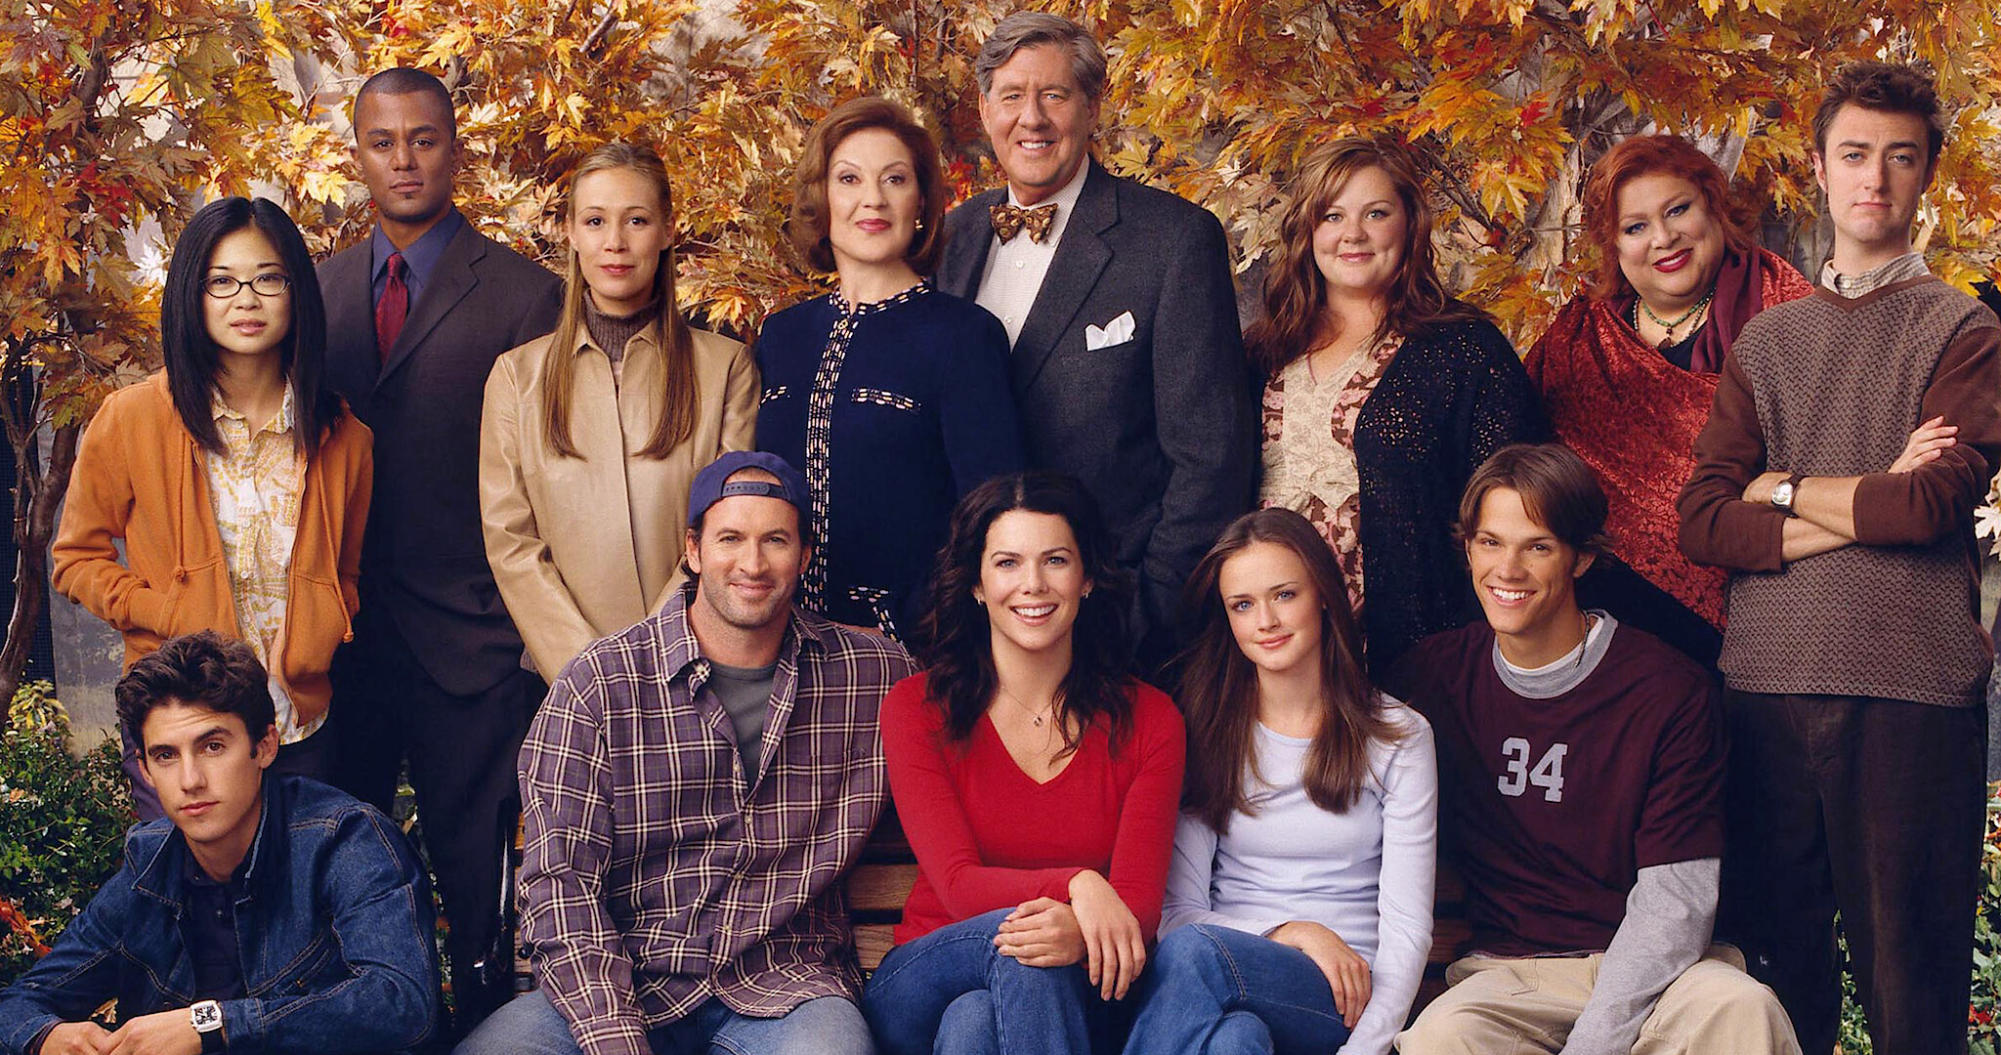 Gilmore Girls debuted on October 5, 2000 on The WB, becoming a flagship series for the now defunct network.
At its core, Gilmore Girls tells the story of a unique mother-daughter relationship. 
The shows creator Amy Sherman-Palladino told the Today Show, “I sold it off of a line. It’s like a mother and daughter, but they’re like friends. And they all perked up and said, ‘Great. We’ll buy that.’”